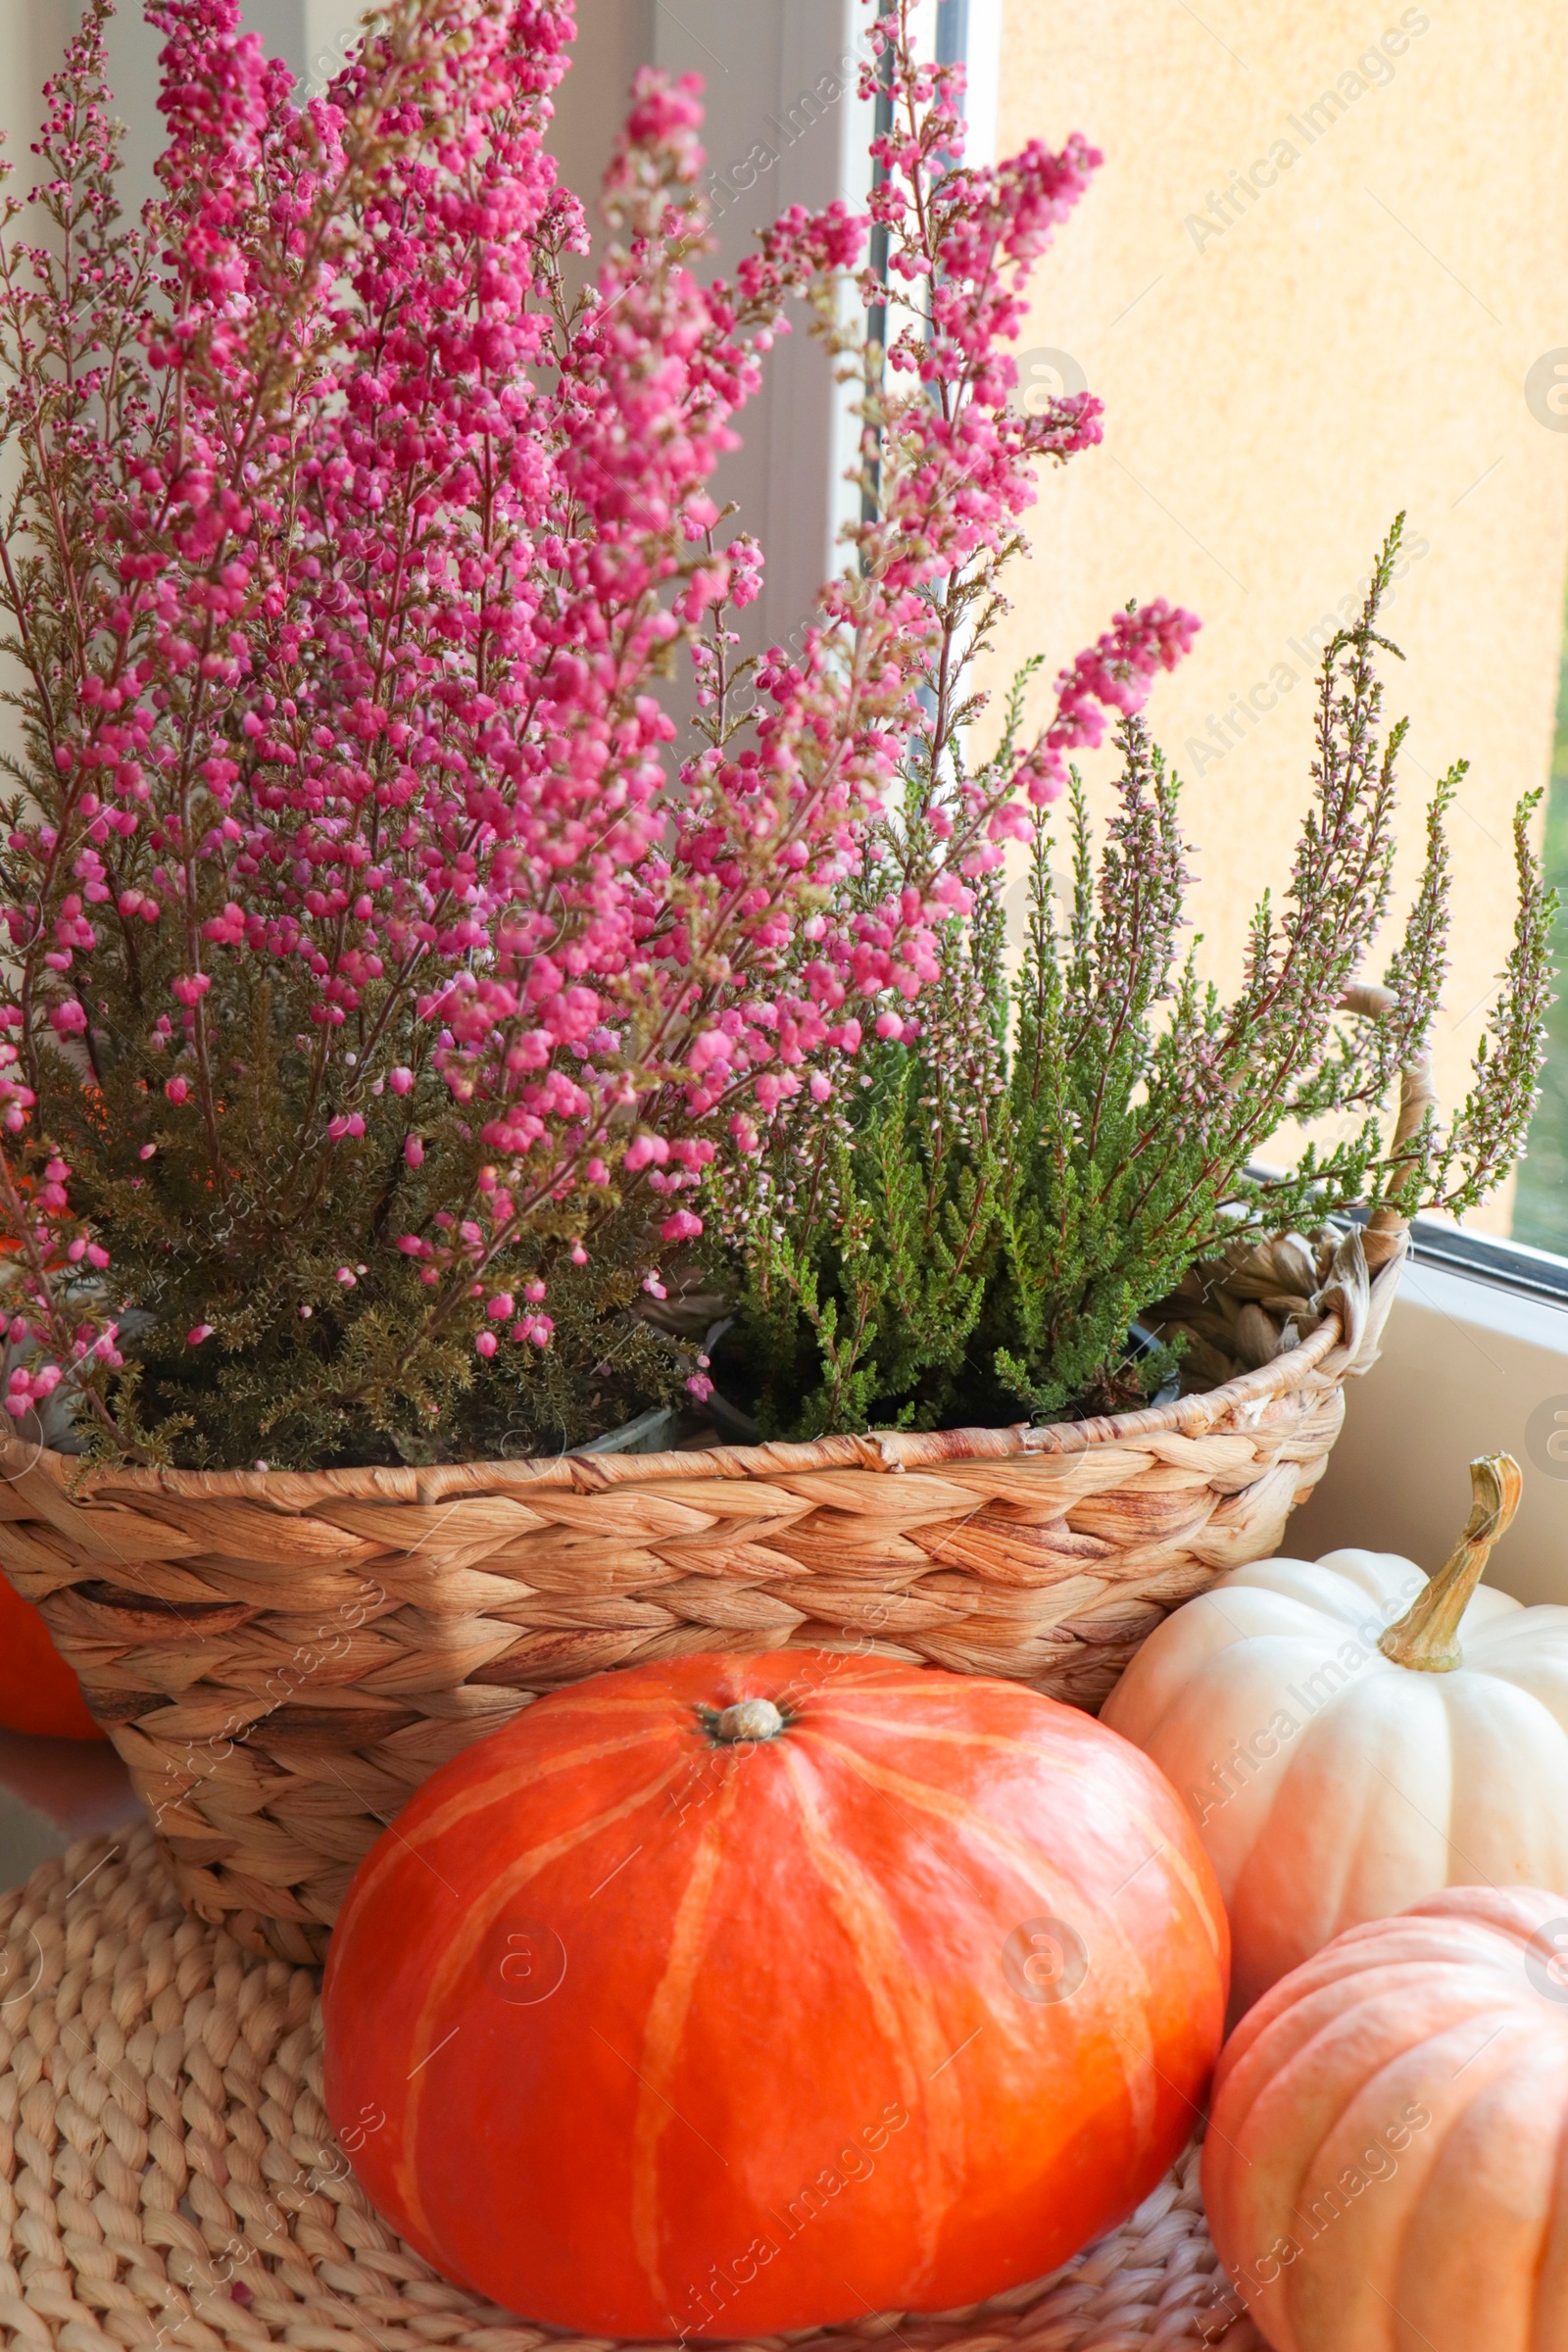 Photo of Wicker basket with beautiful heather flowers and pumpkins near window indoors